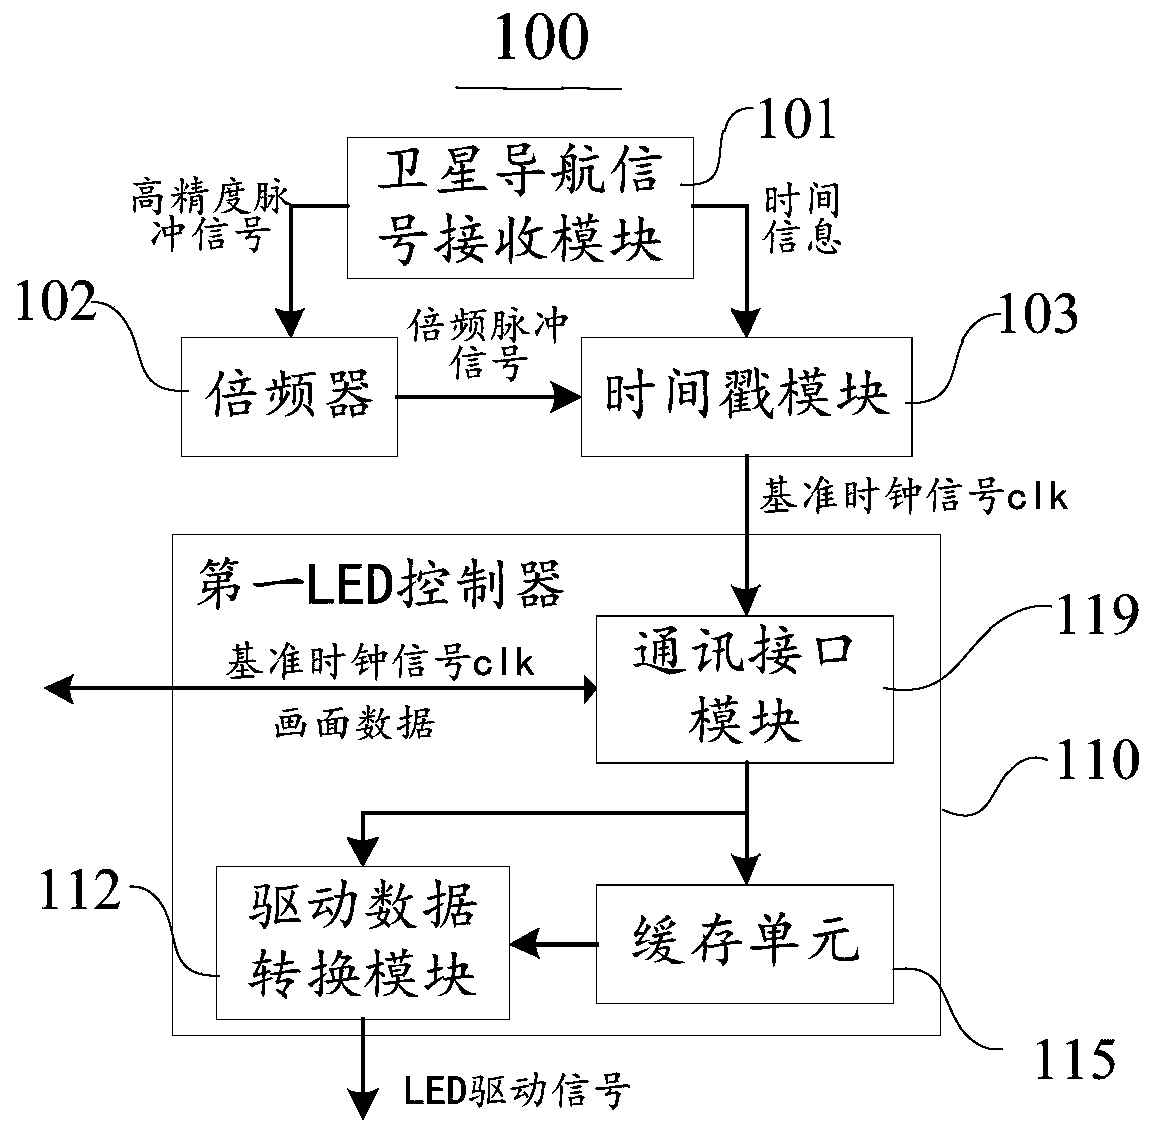 Auxiliary synchronization LED control device and LED light control system